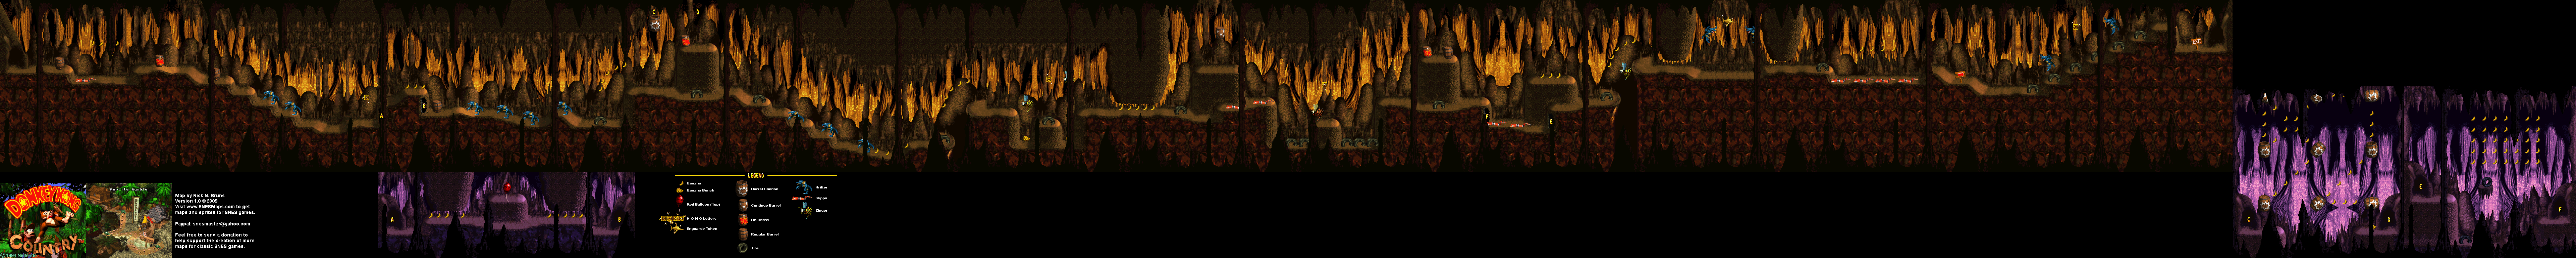 Donkey Kong Country - Level 3 - Reptile Rumble - Super Nintendo SNES Map - Foreground Included